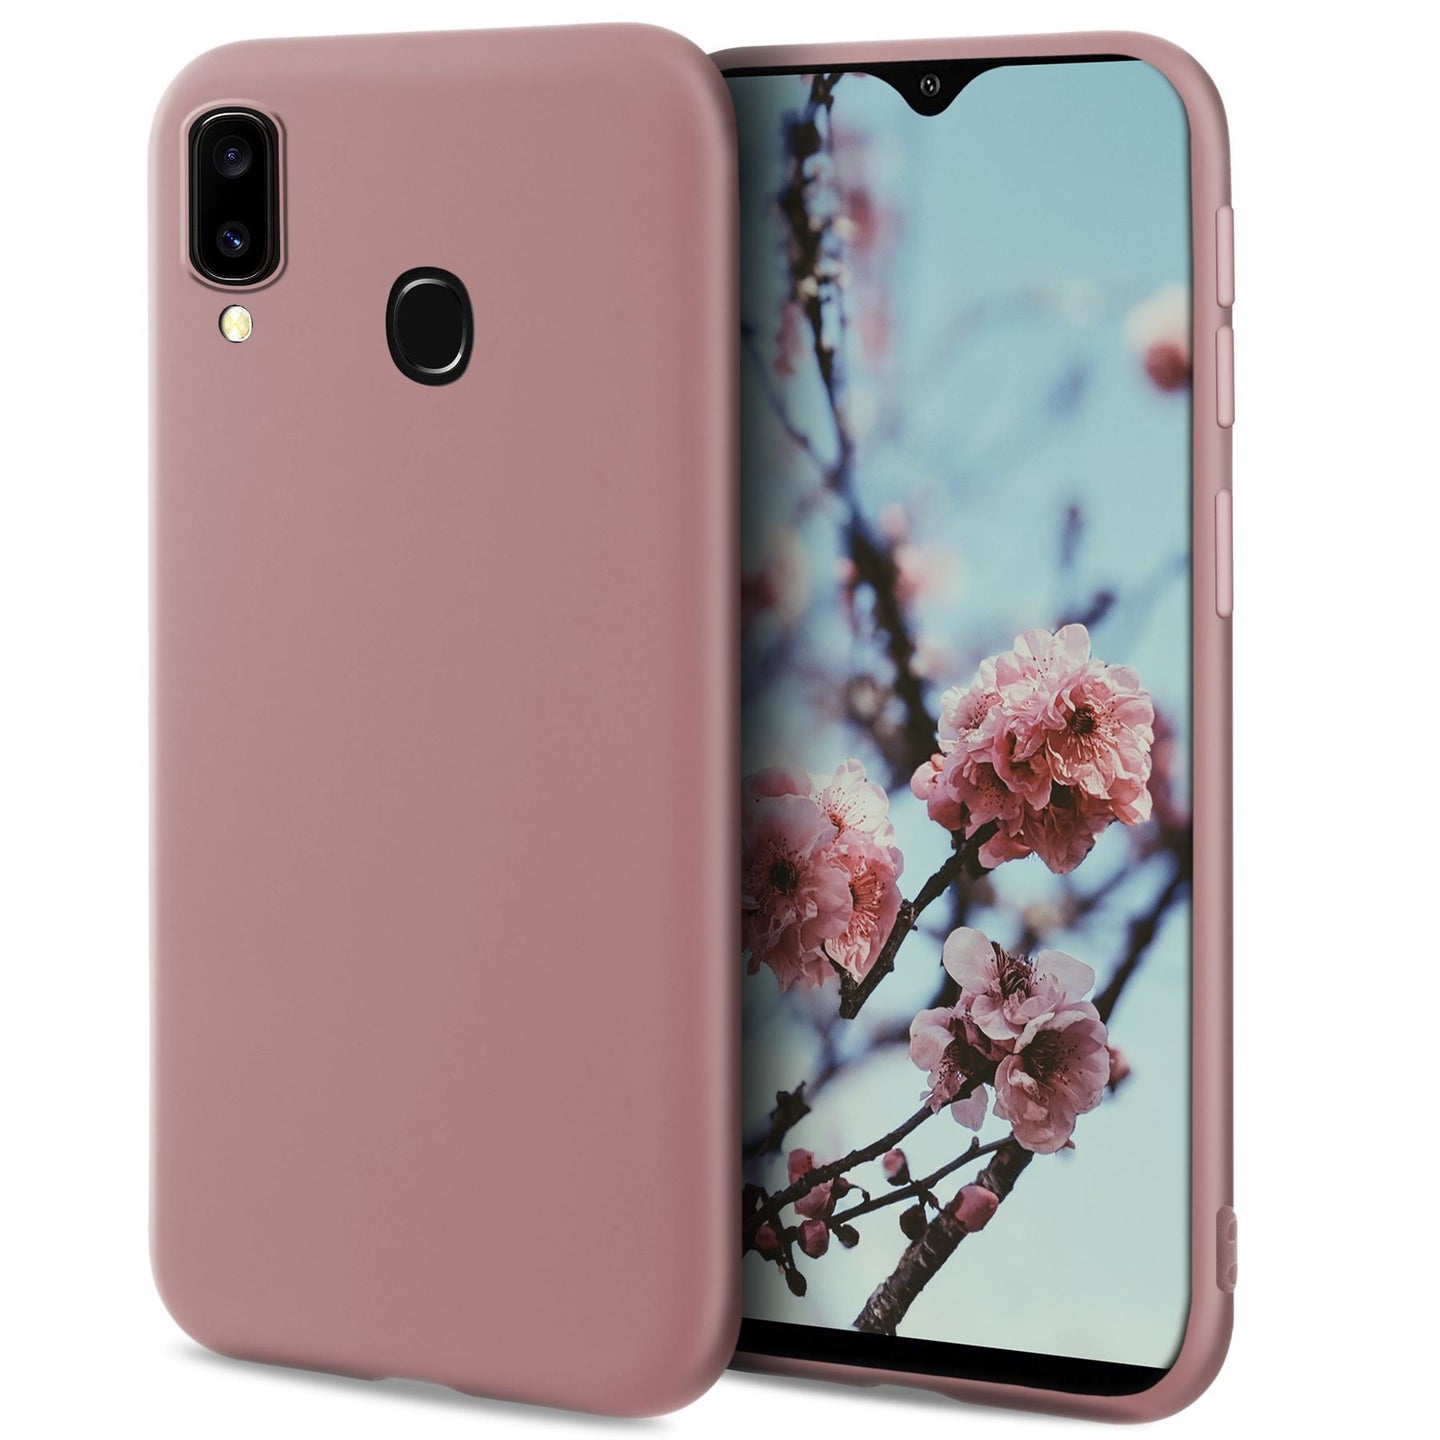 Moozy Minimalist Series Silicone Case for Samsung A40, Rose Beige - Matte Finish Slim Soft TPU Cover